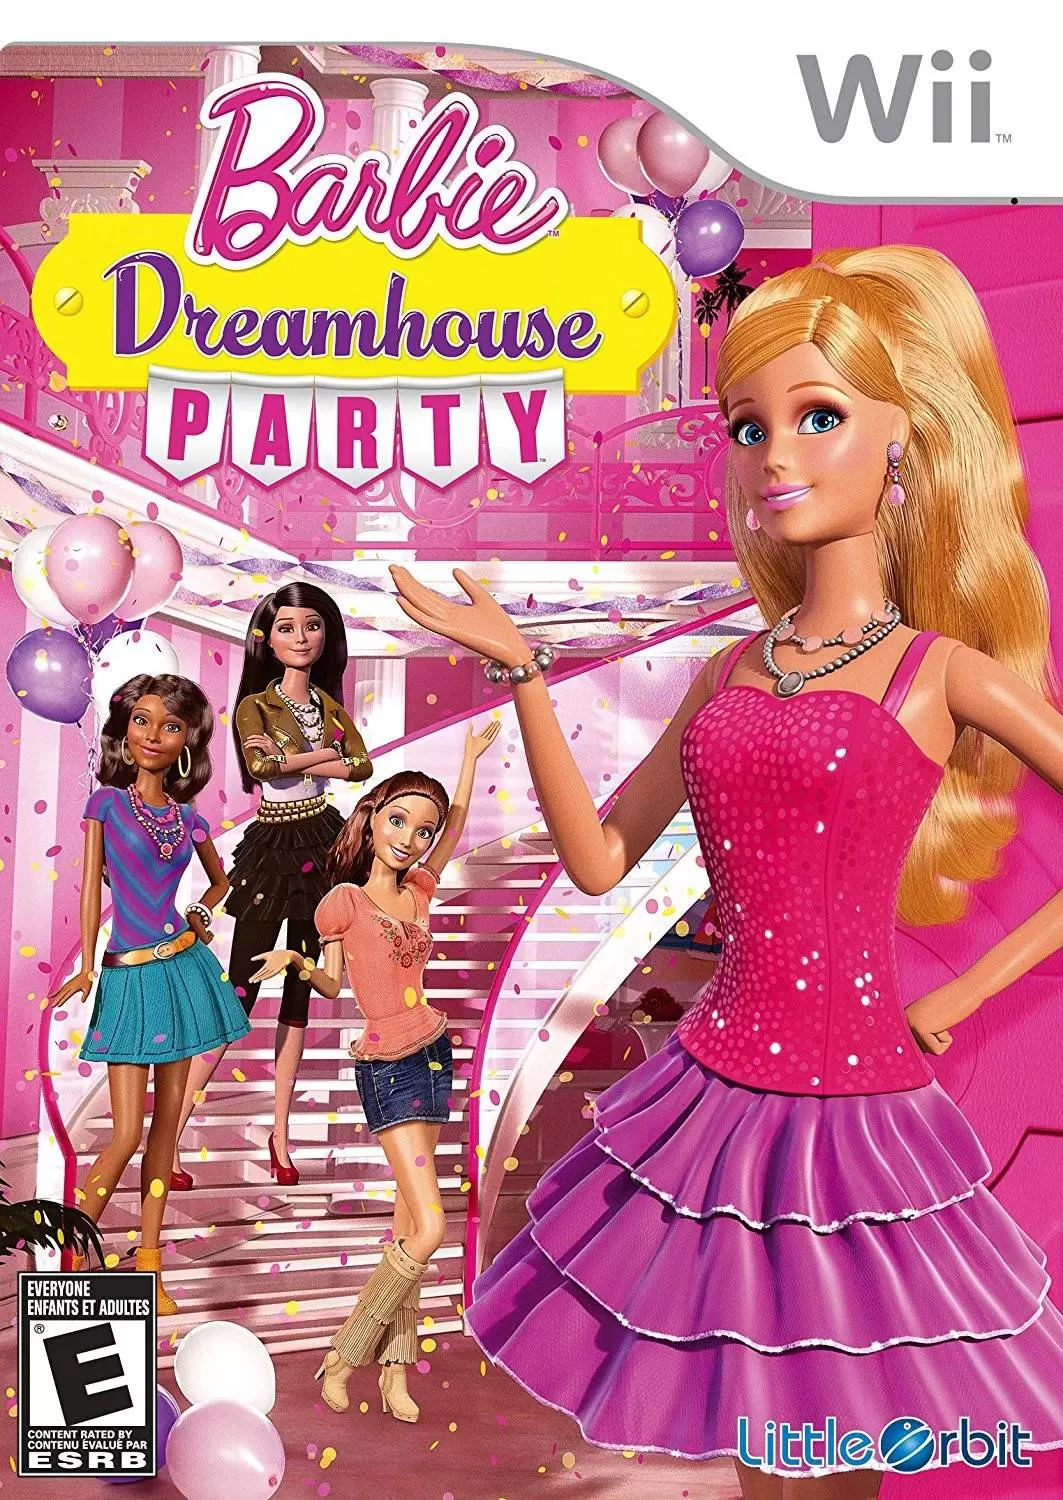 Nintendo Wii Games - Barbie Dreamhouse Party